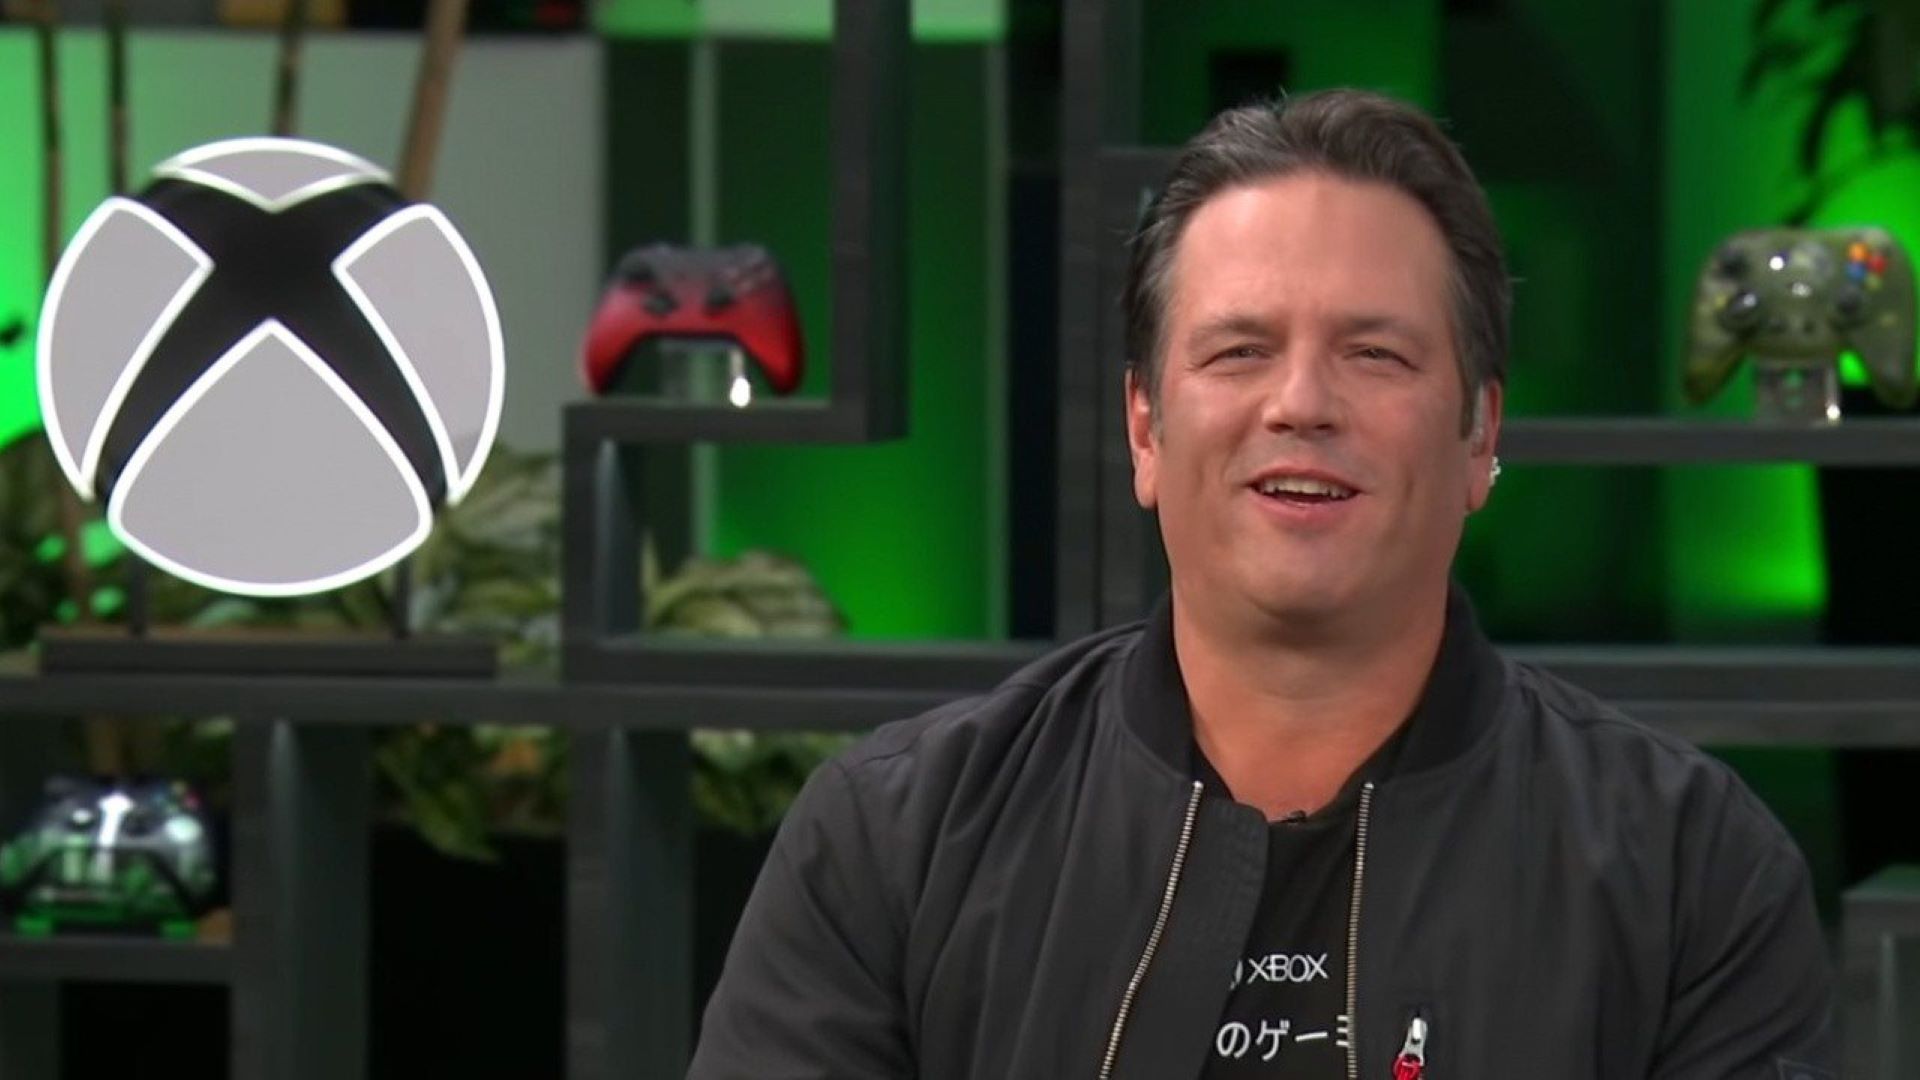 Phil Spencer says Xbox will “absolutely support” new union at Activision Blizzard’s Raven Software